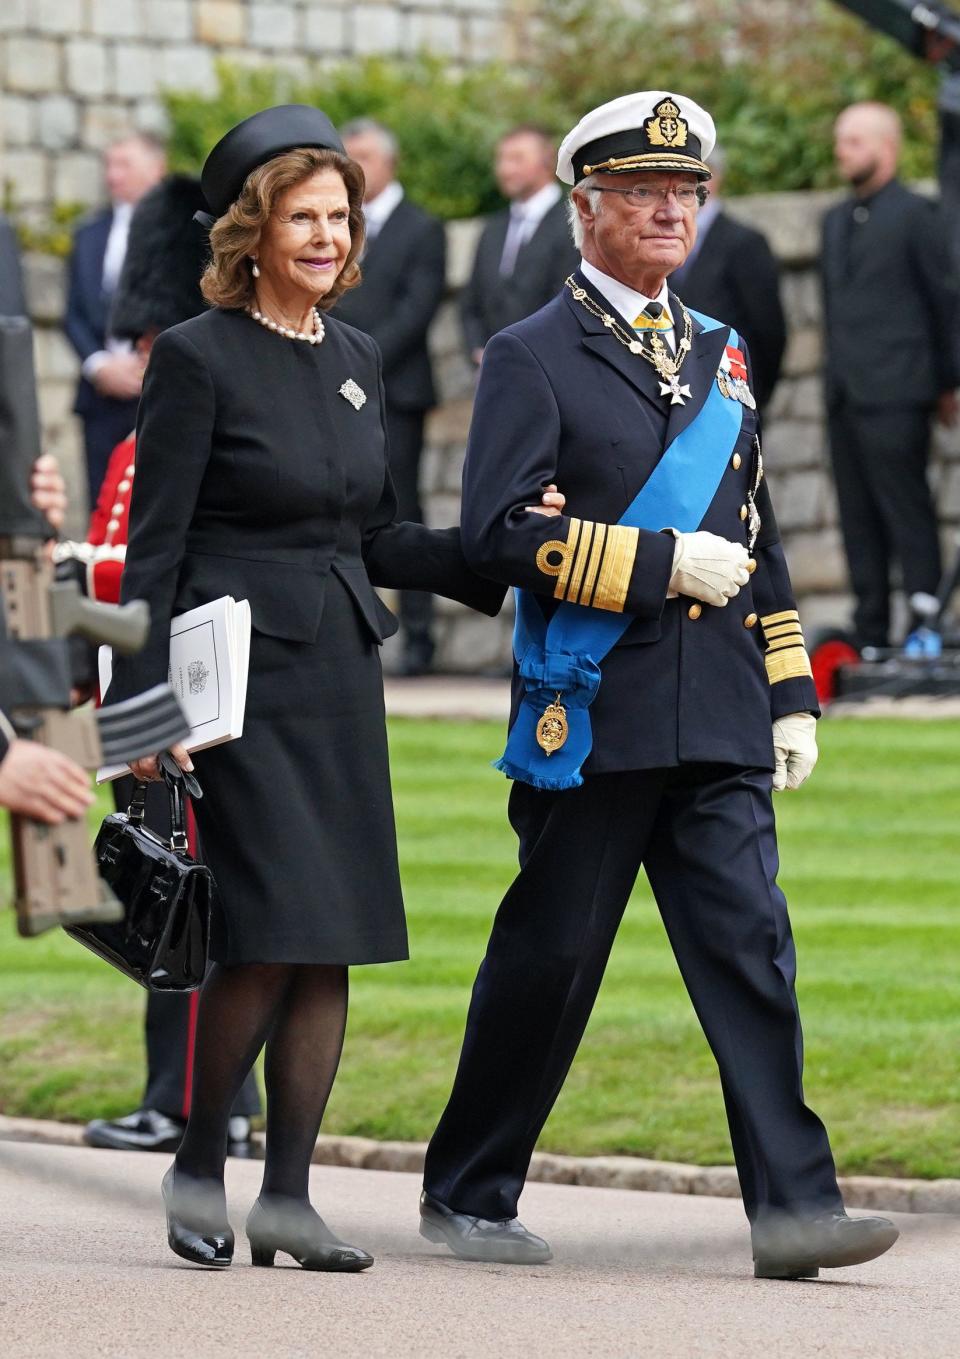 Queen Silvia of Sweden and Carl XVI Gustaf King of Sweden arrive at the Committal Service for Queen Elizabeth II held at St George's Chapel in Windsor Castle on September 19, 2022.